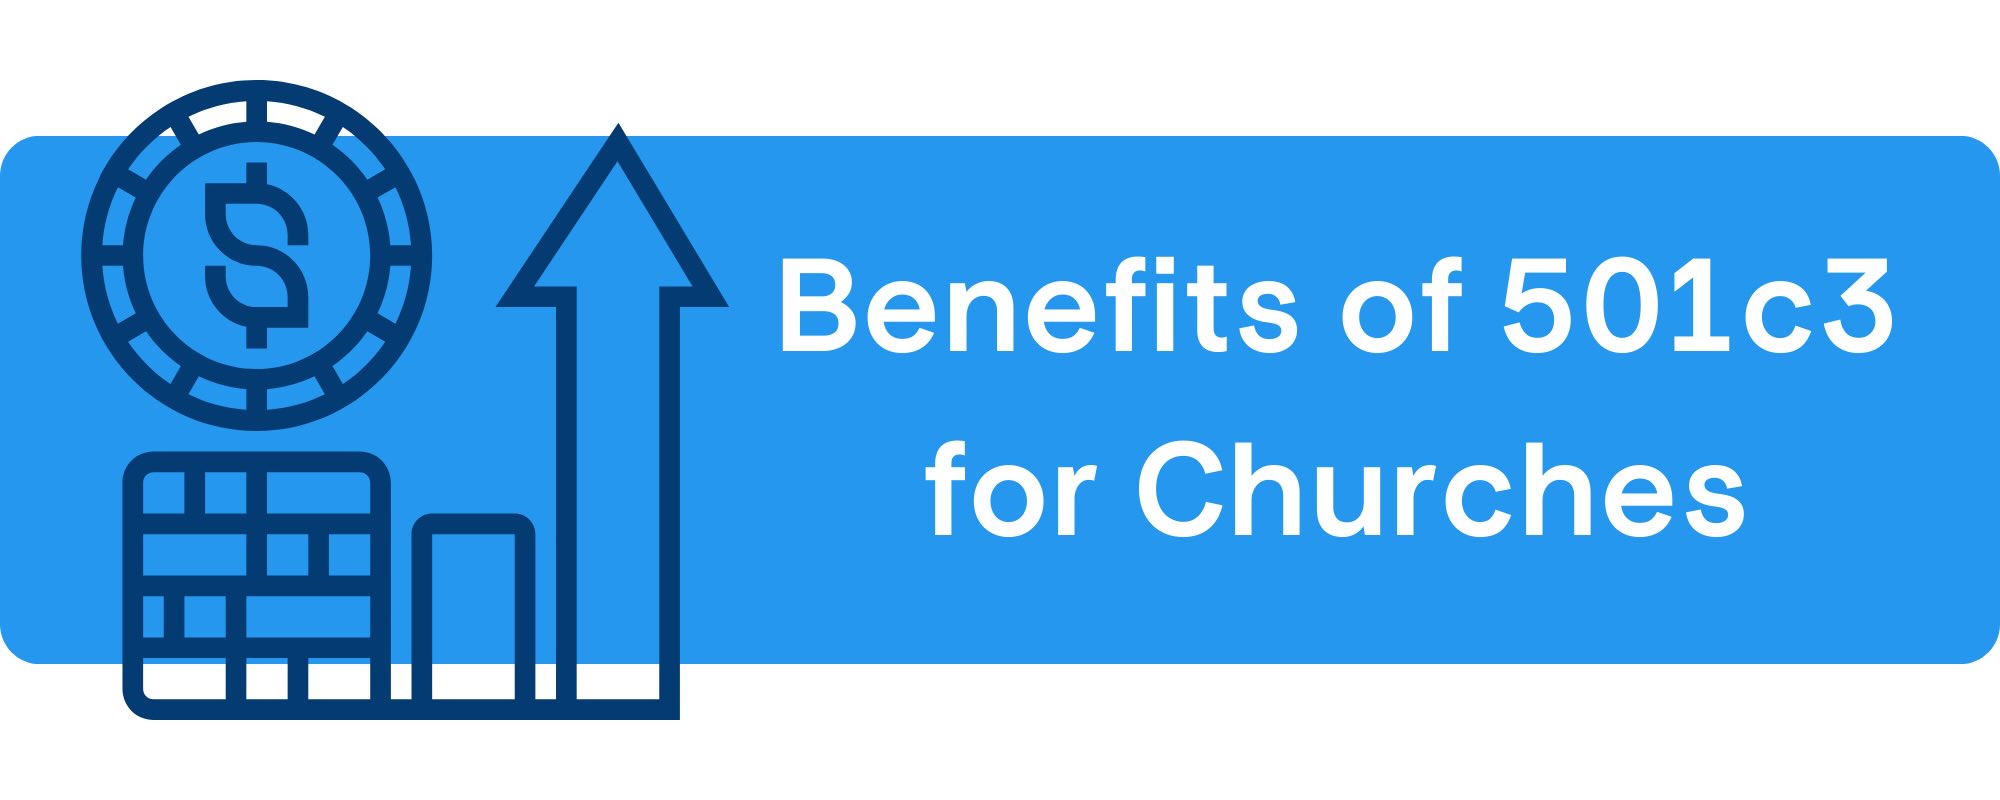 These benefits make obtaining 501c3 status an attractive option for many churches and religious organizations